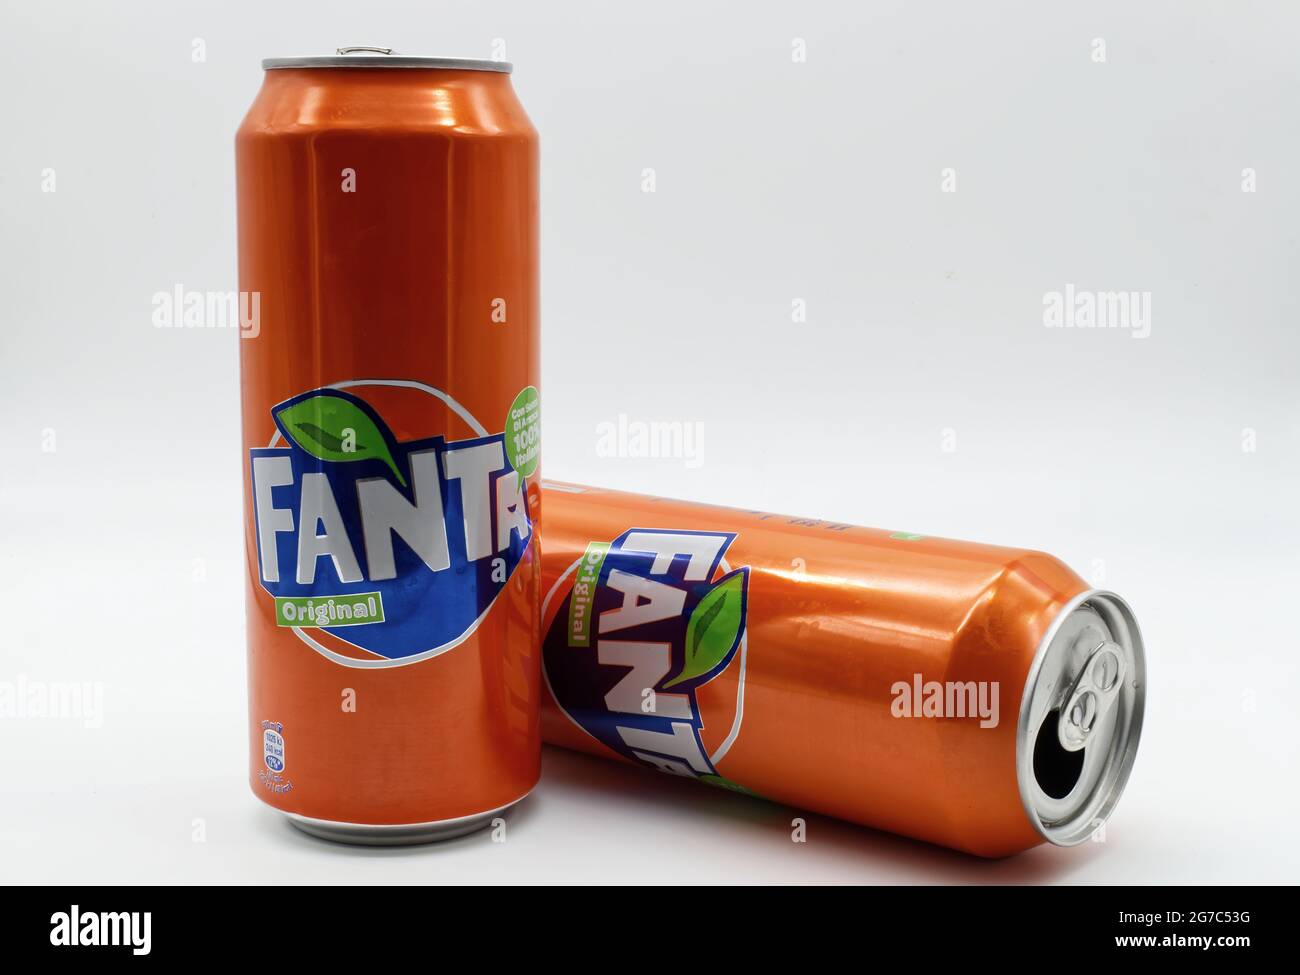 Bologna - Italy - July 12, 2021: Cans of Fanta soda isolated on white background Stock Photo